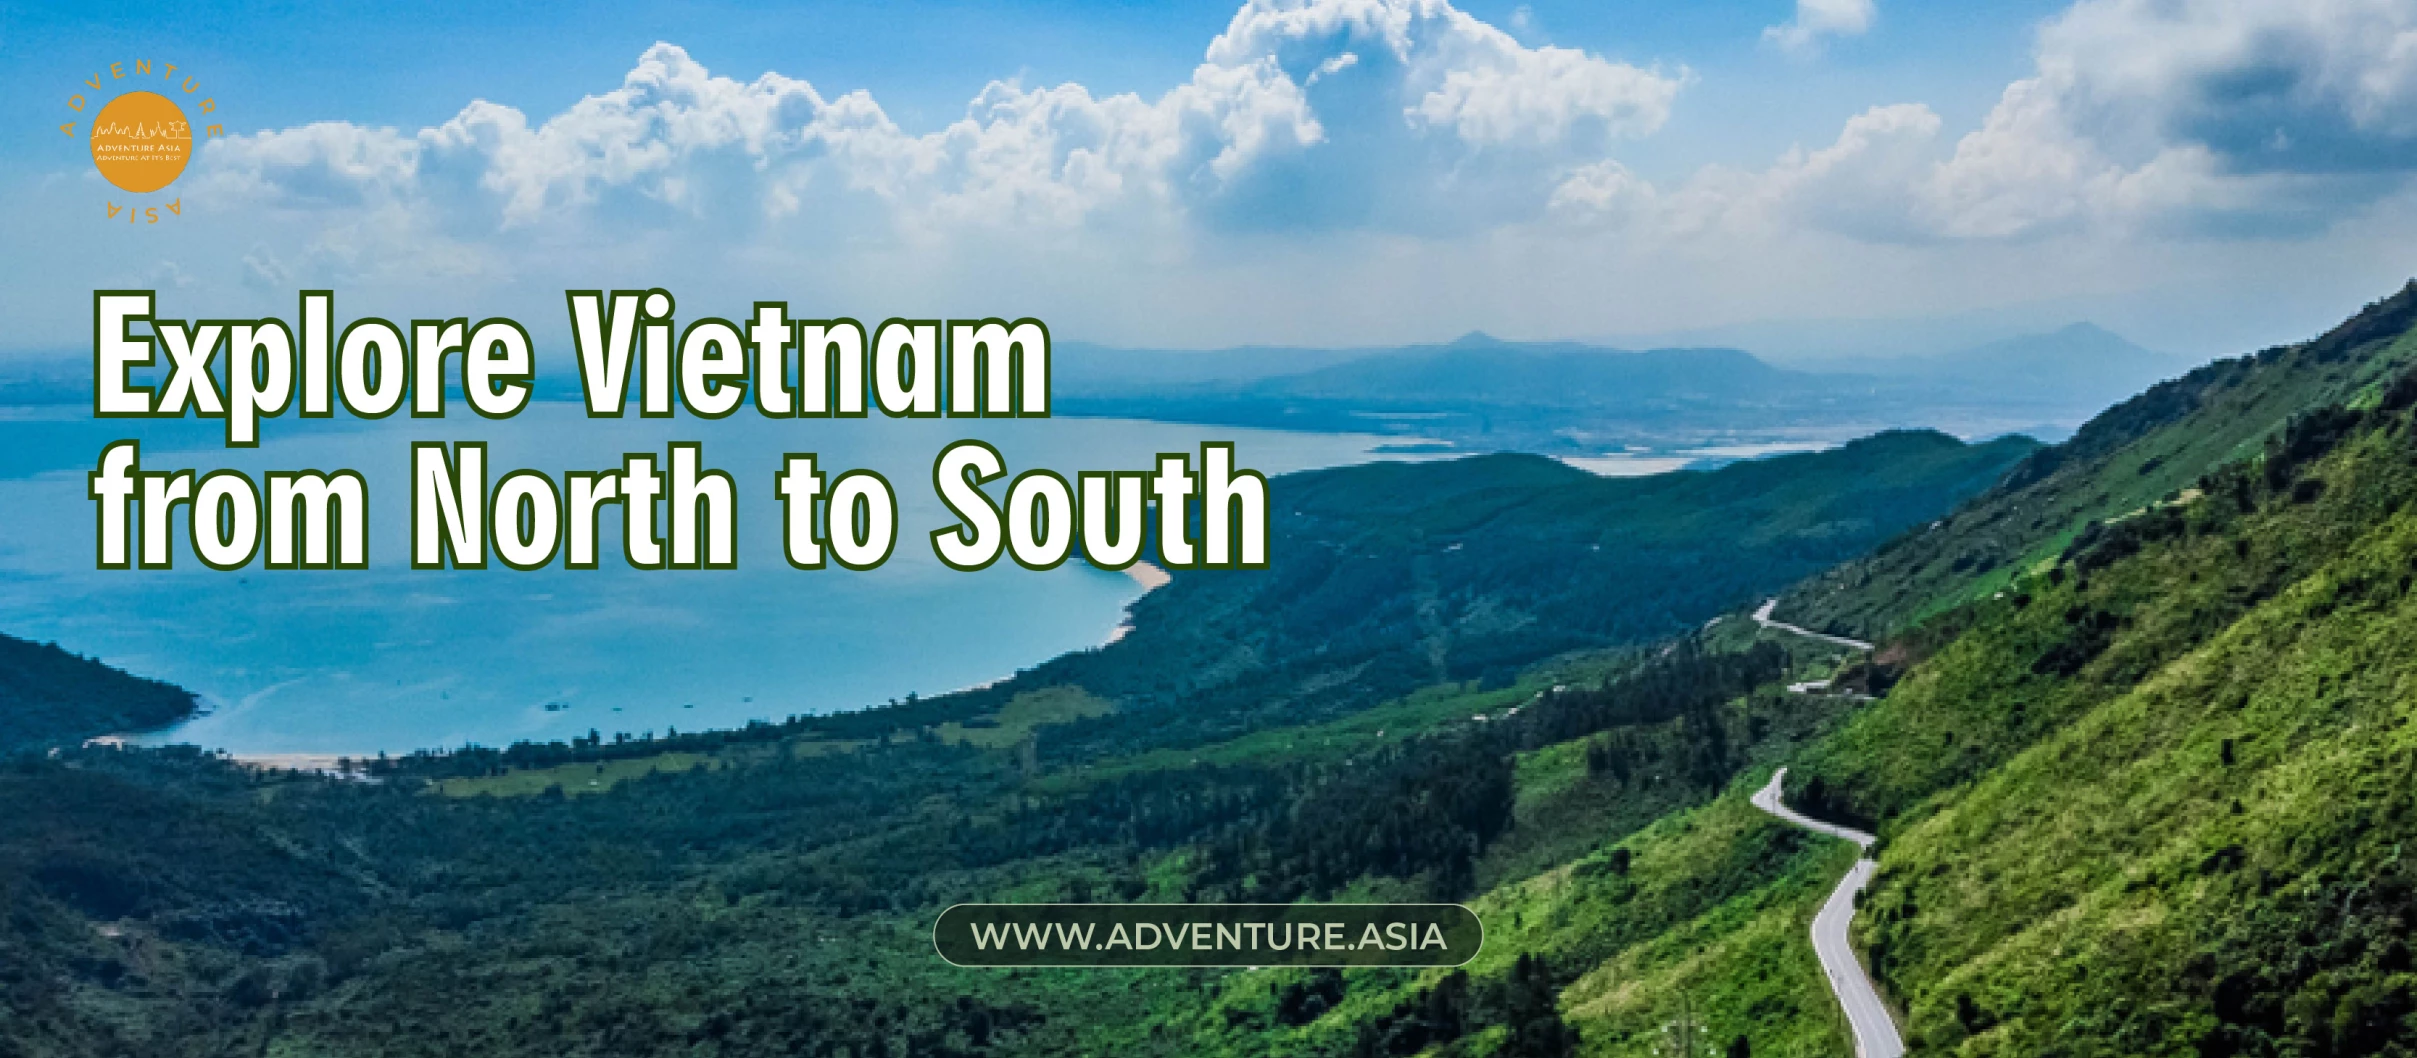 Explore Vietnam with the Unforgettable Adventures from North to South